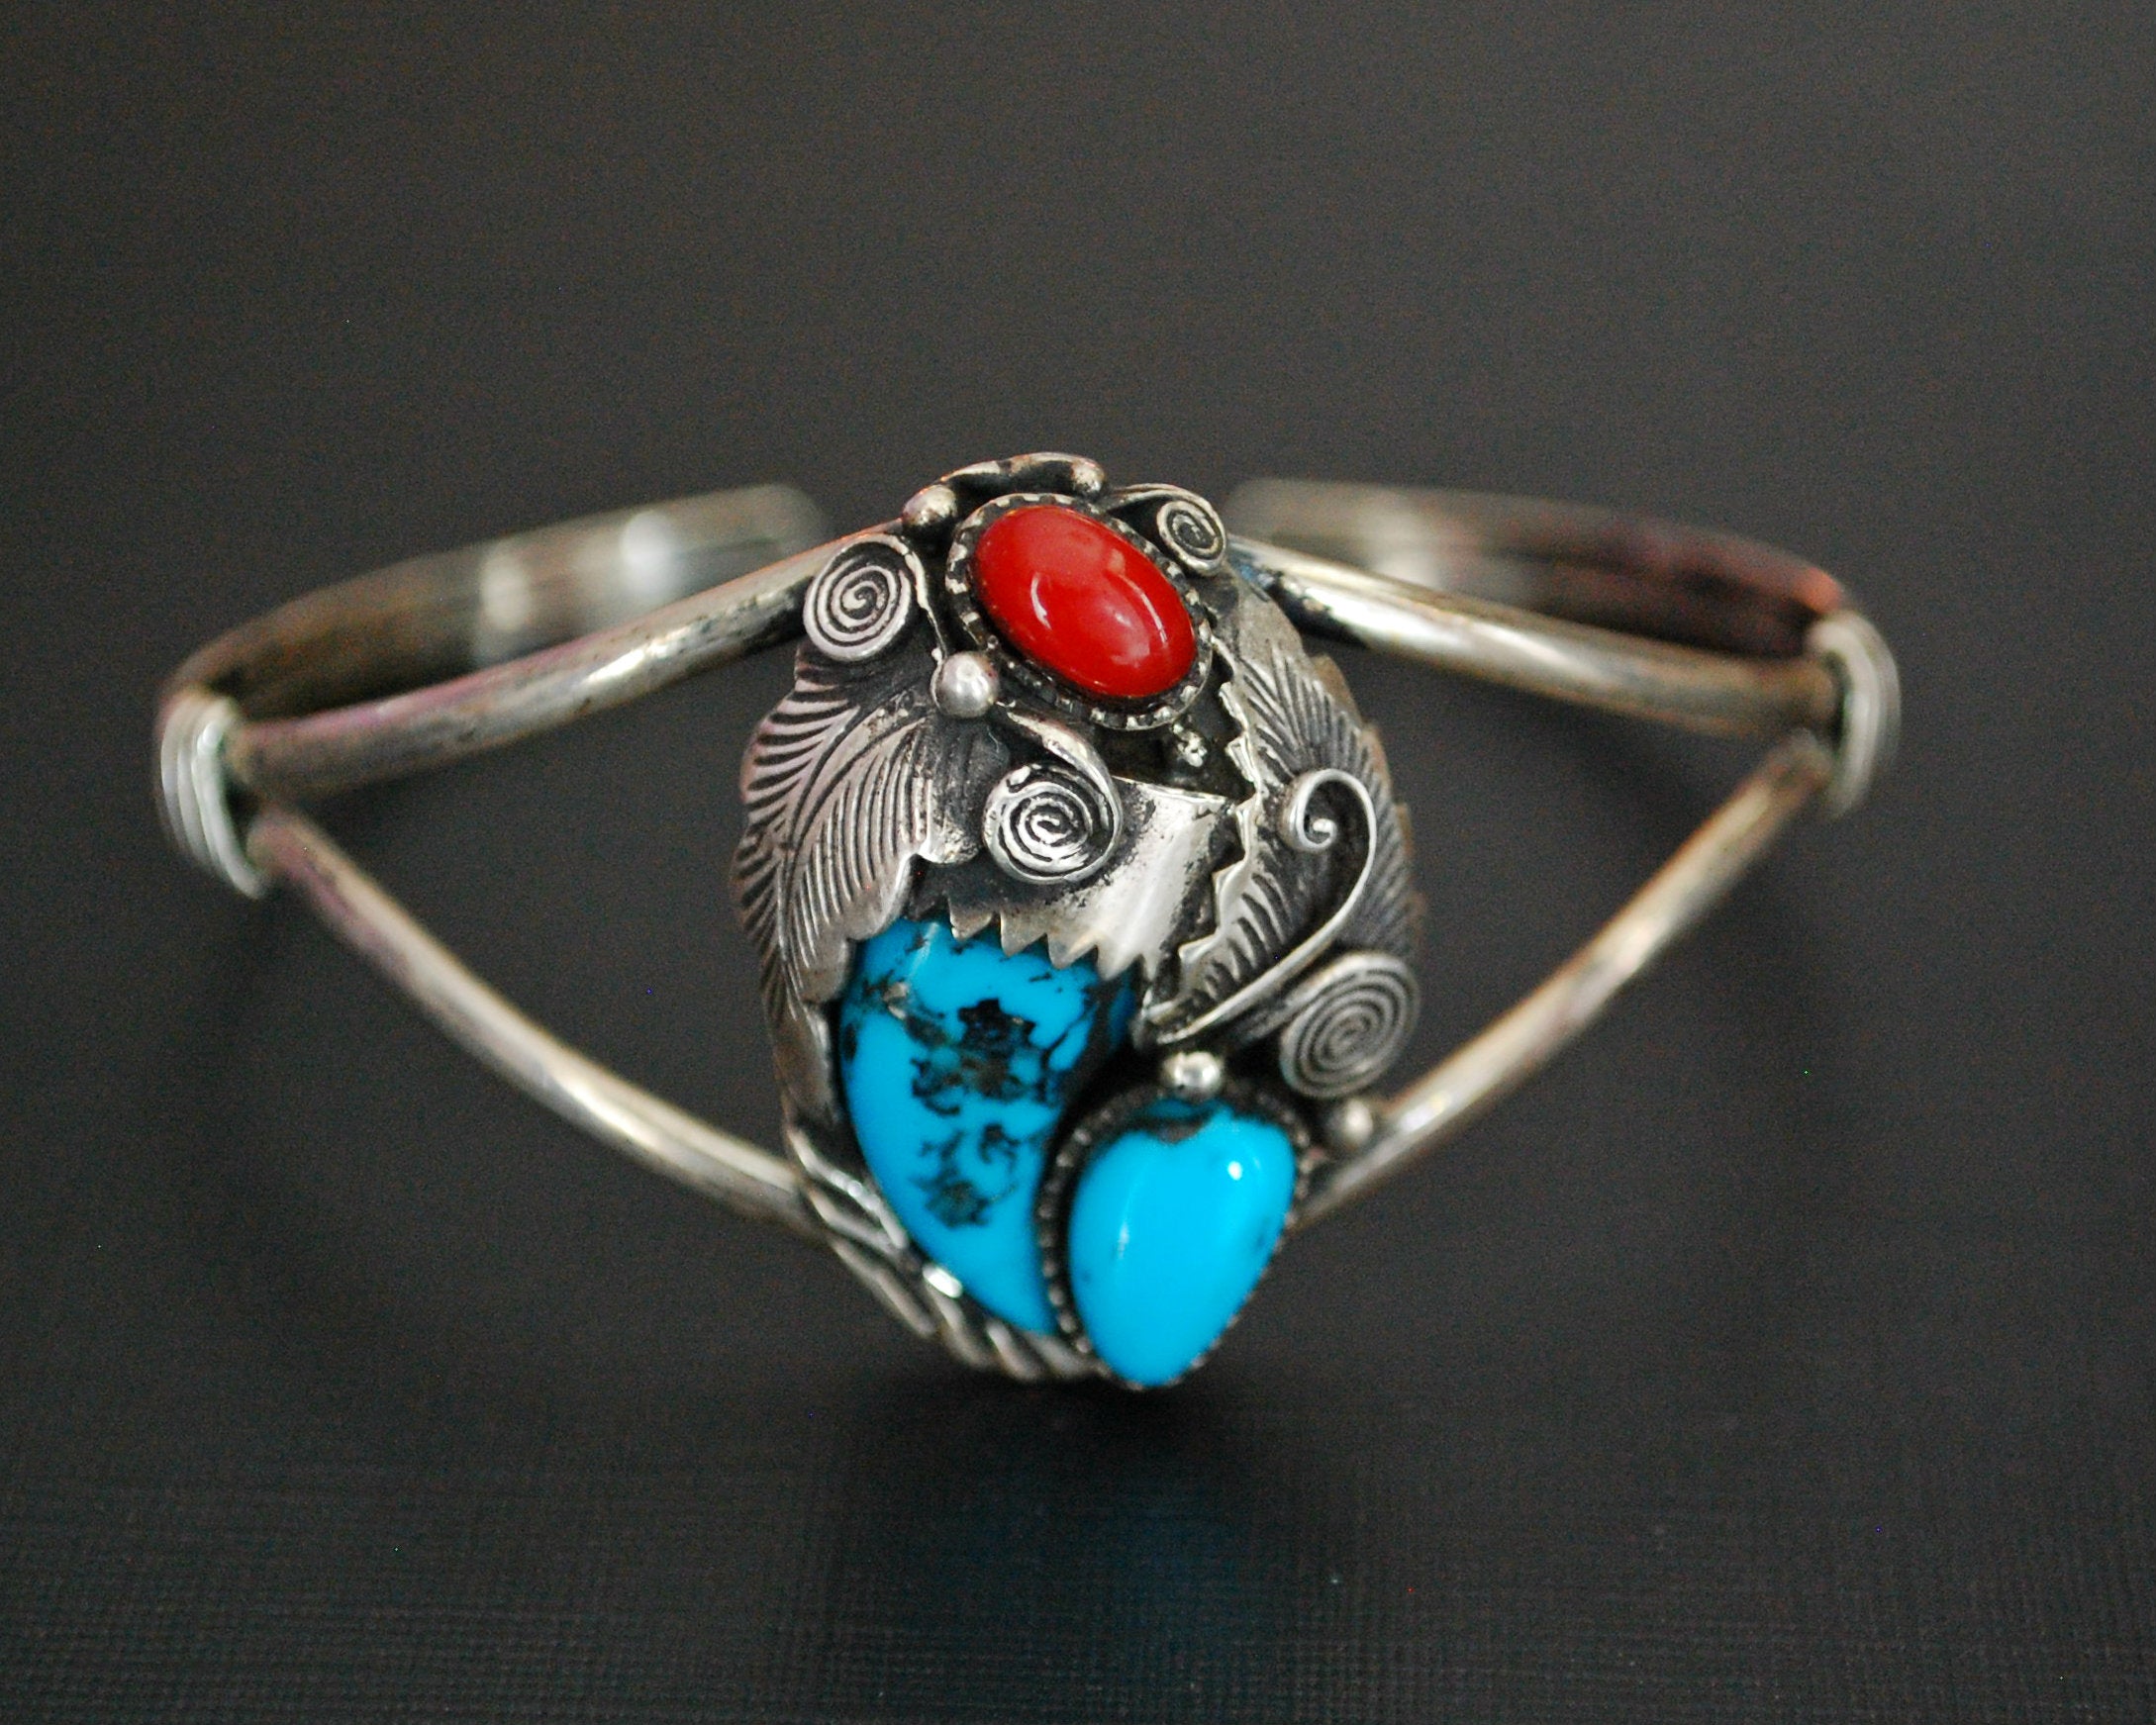 Navajo Turquoise Coral Claw Cuff Bracelet